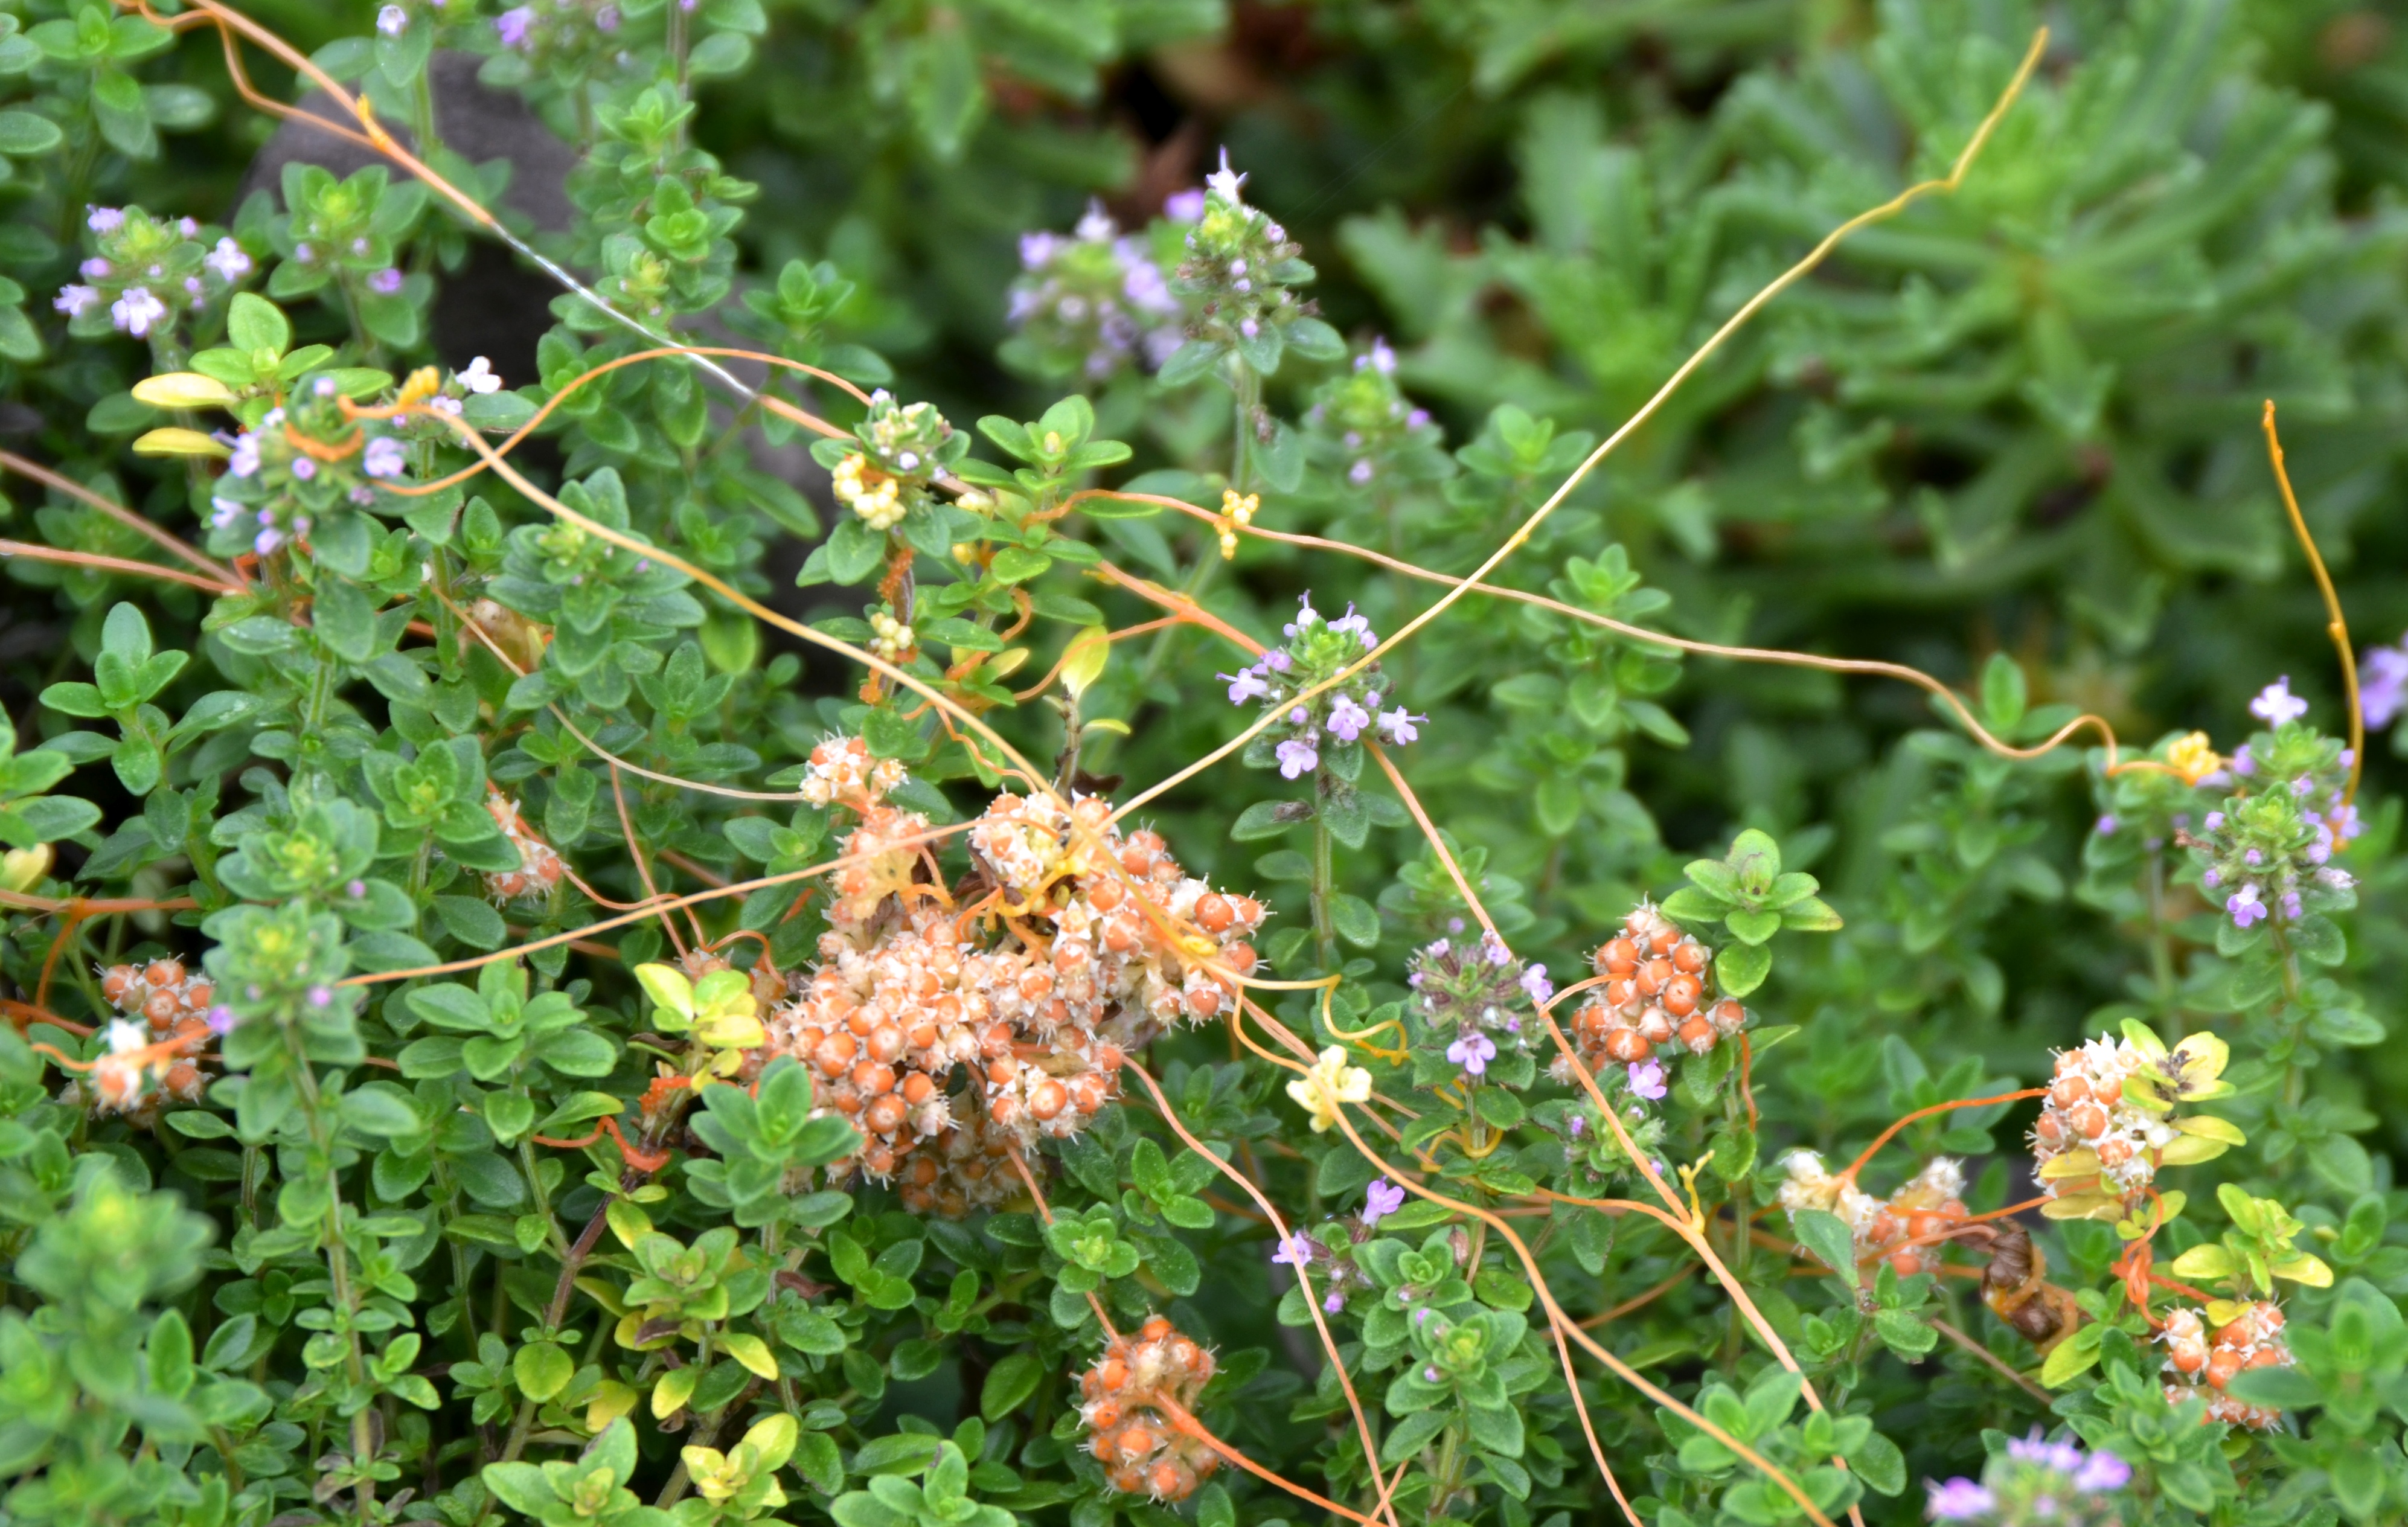 Thyme Dodder is a parasitic plant that contains no chlorophyll